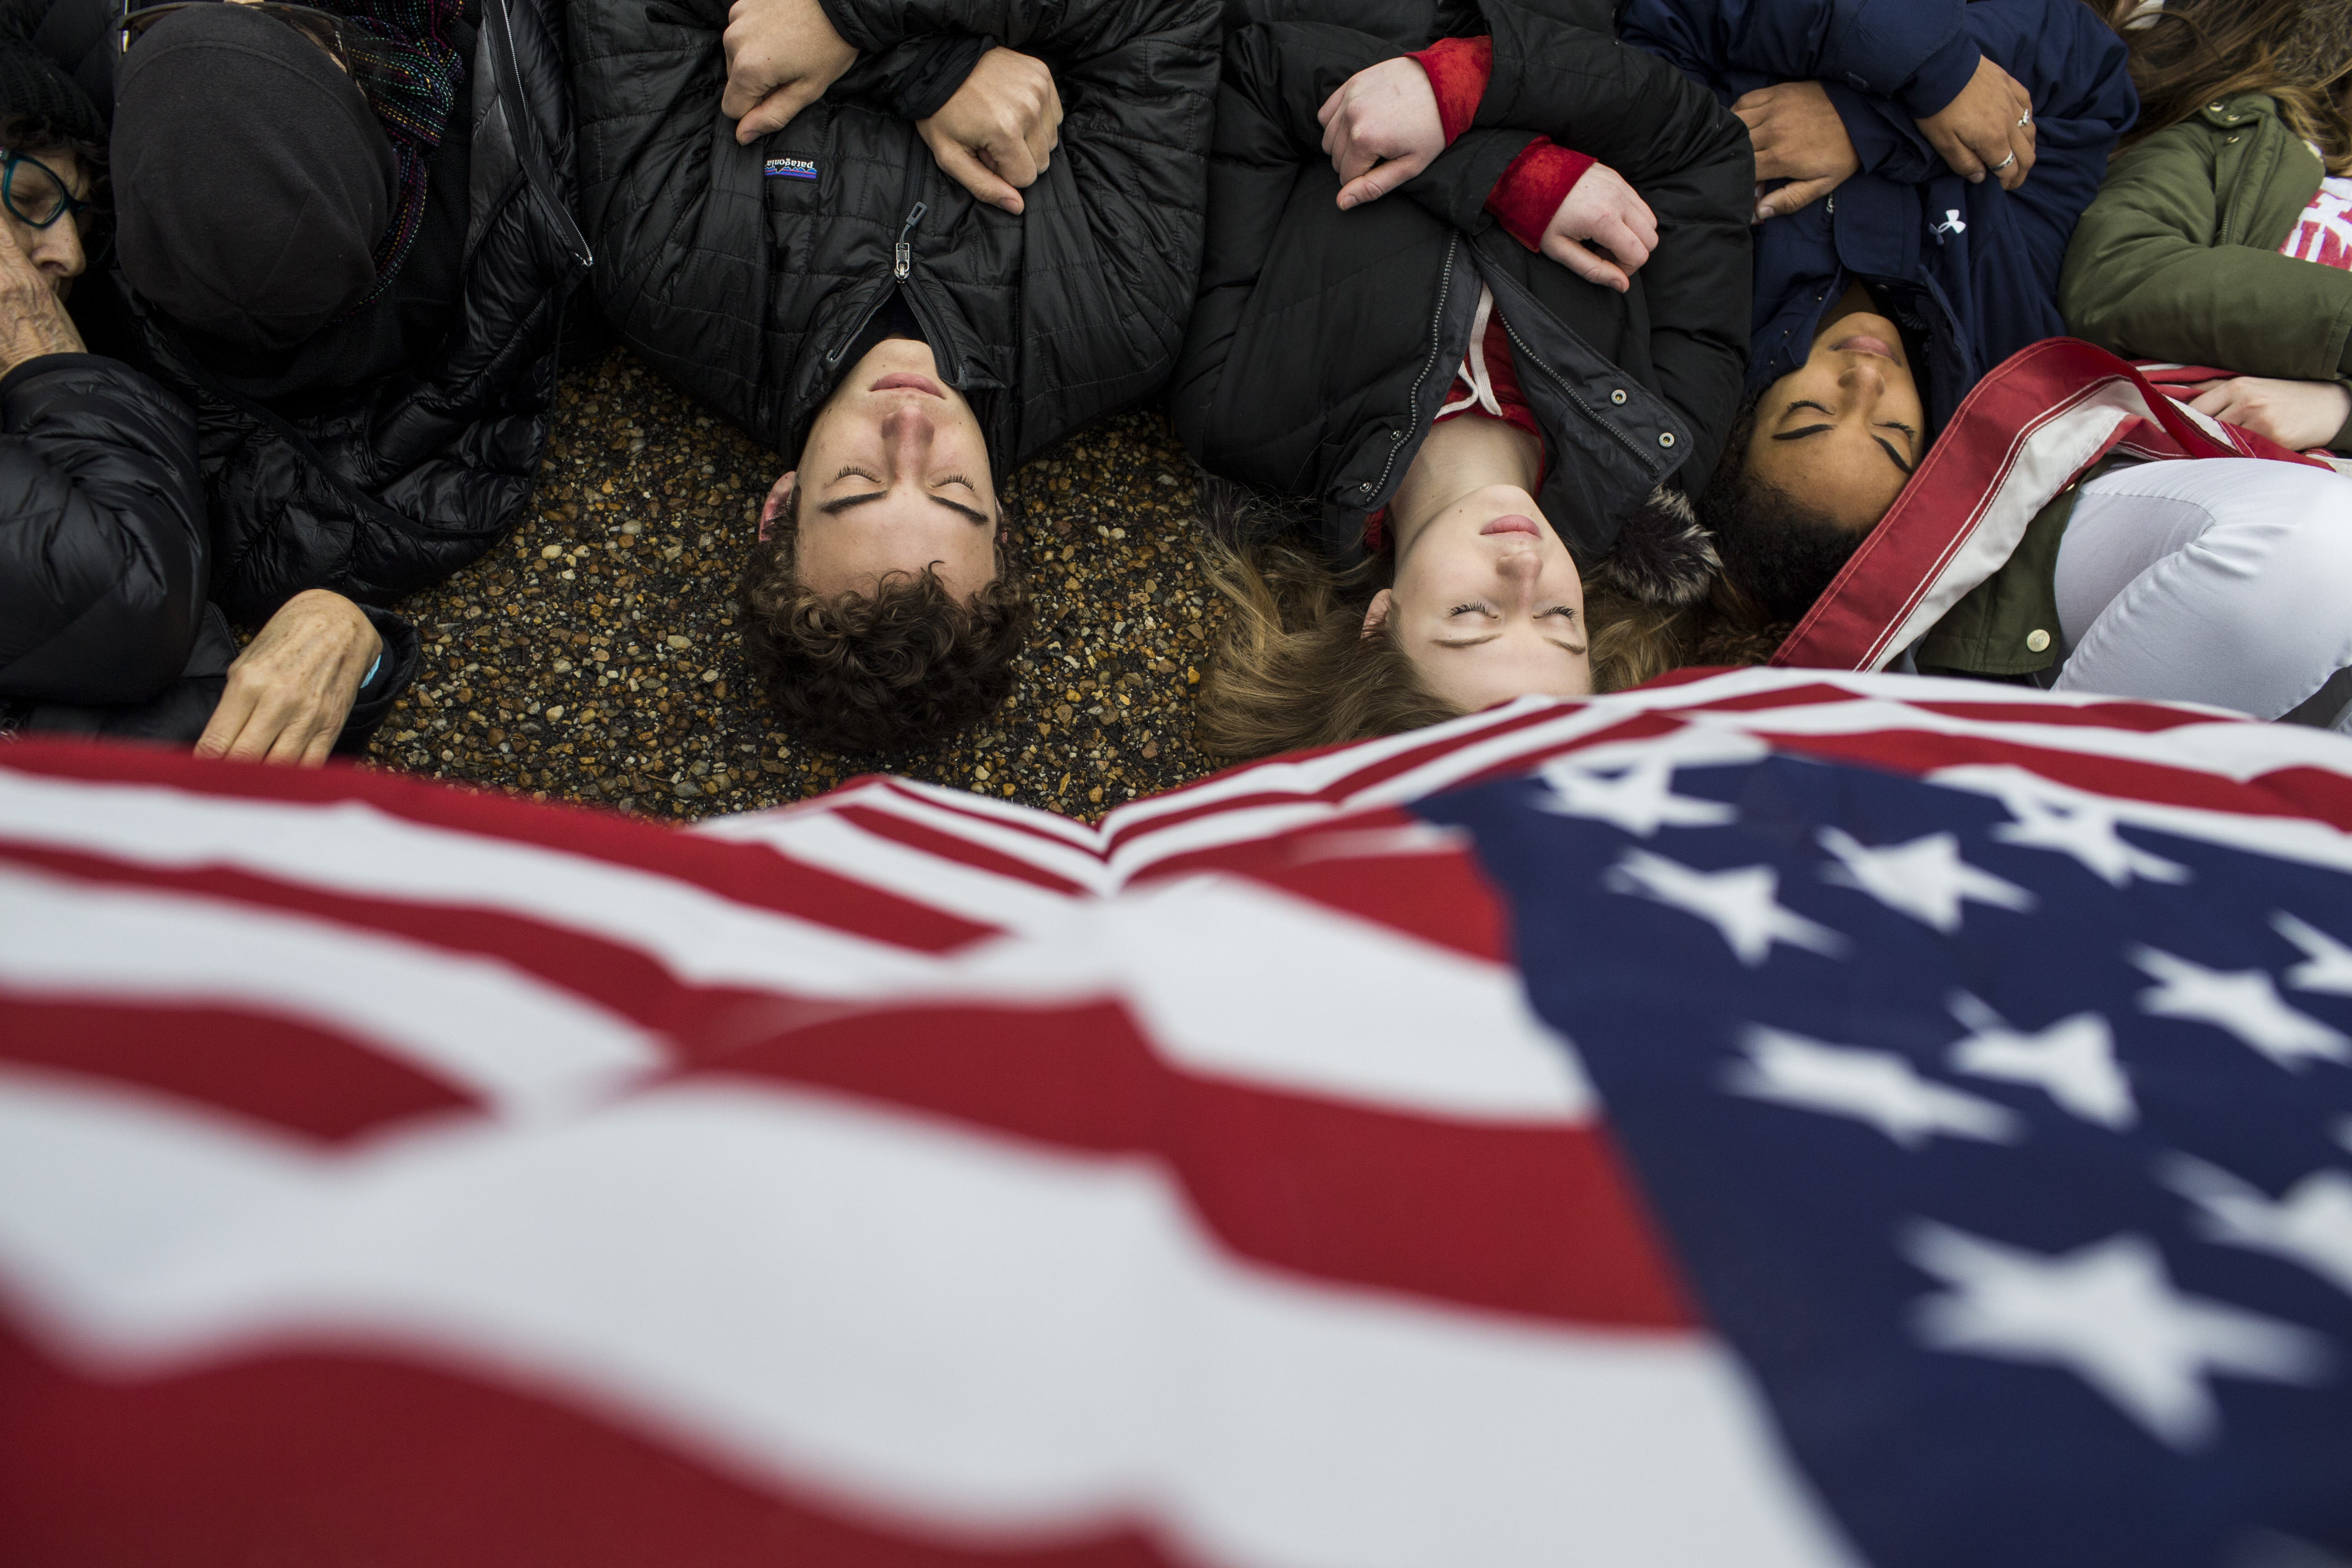 Demonstrators lie down to represent students killed in a recent school shooting